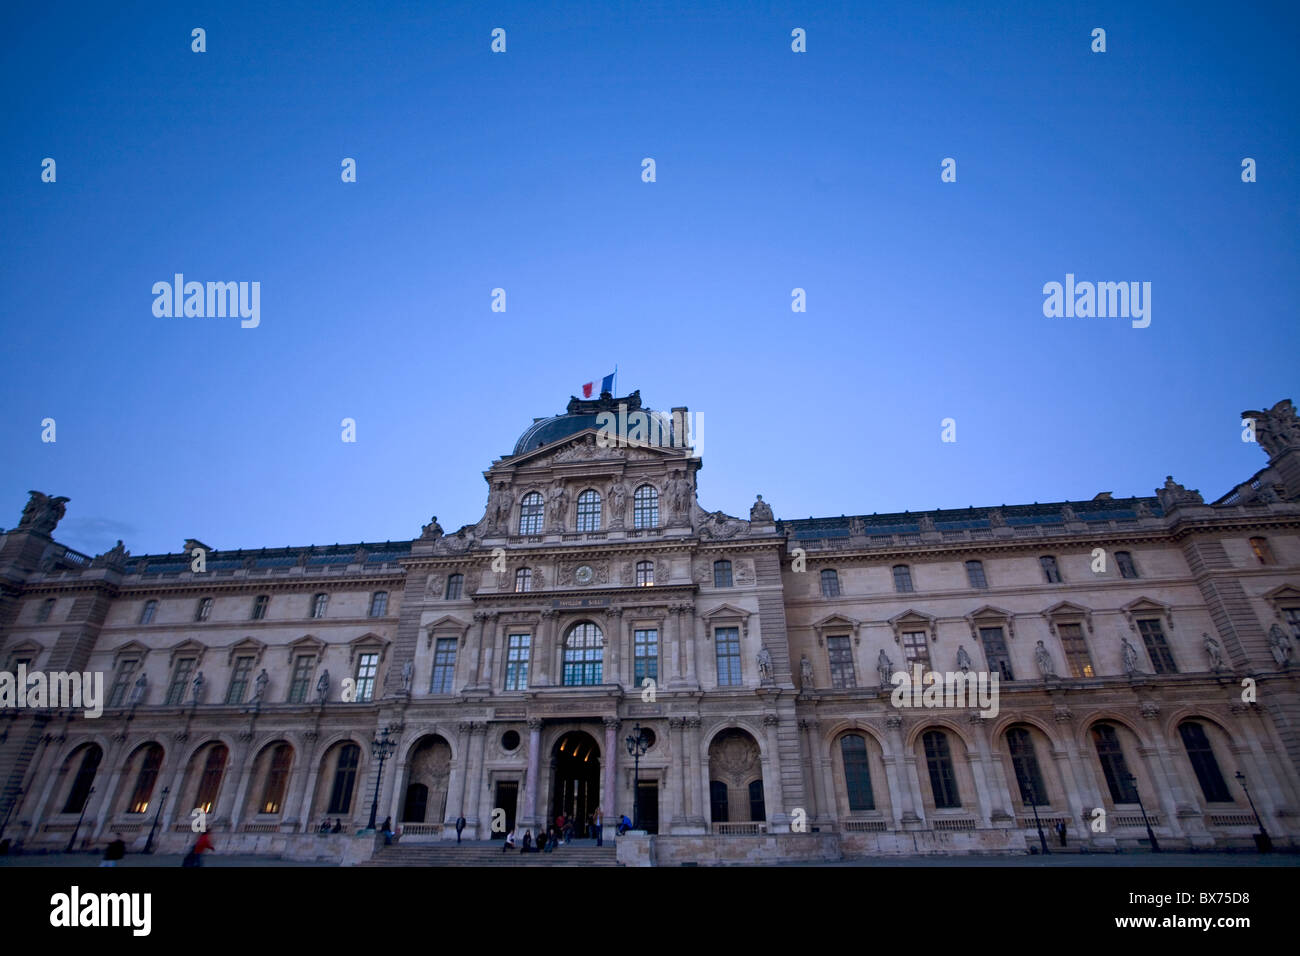 the facade of the musée du louvre Stock Photo